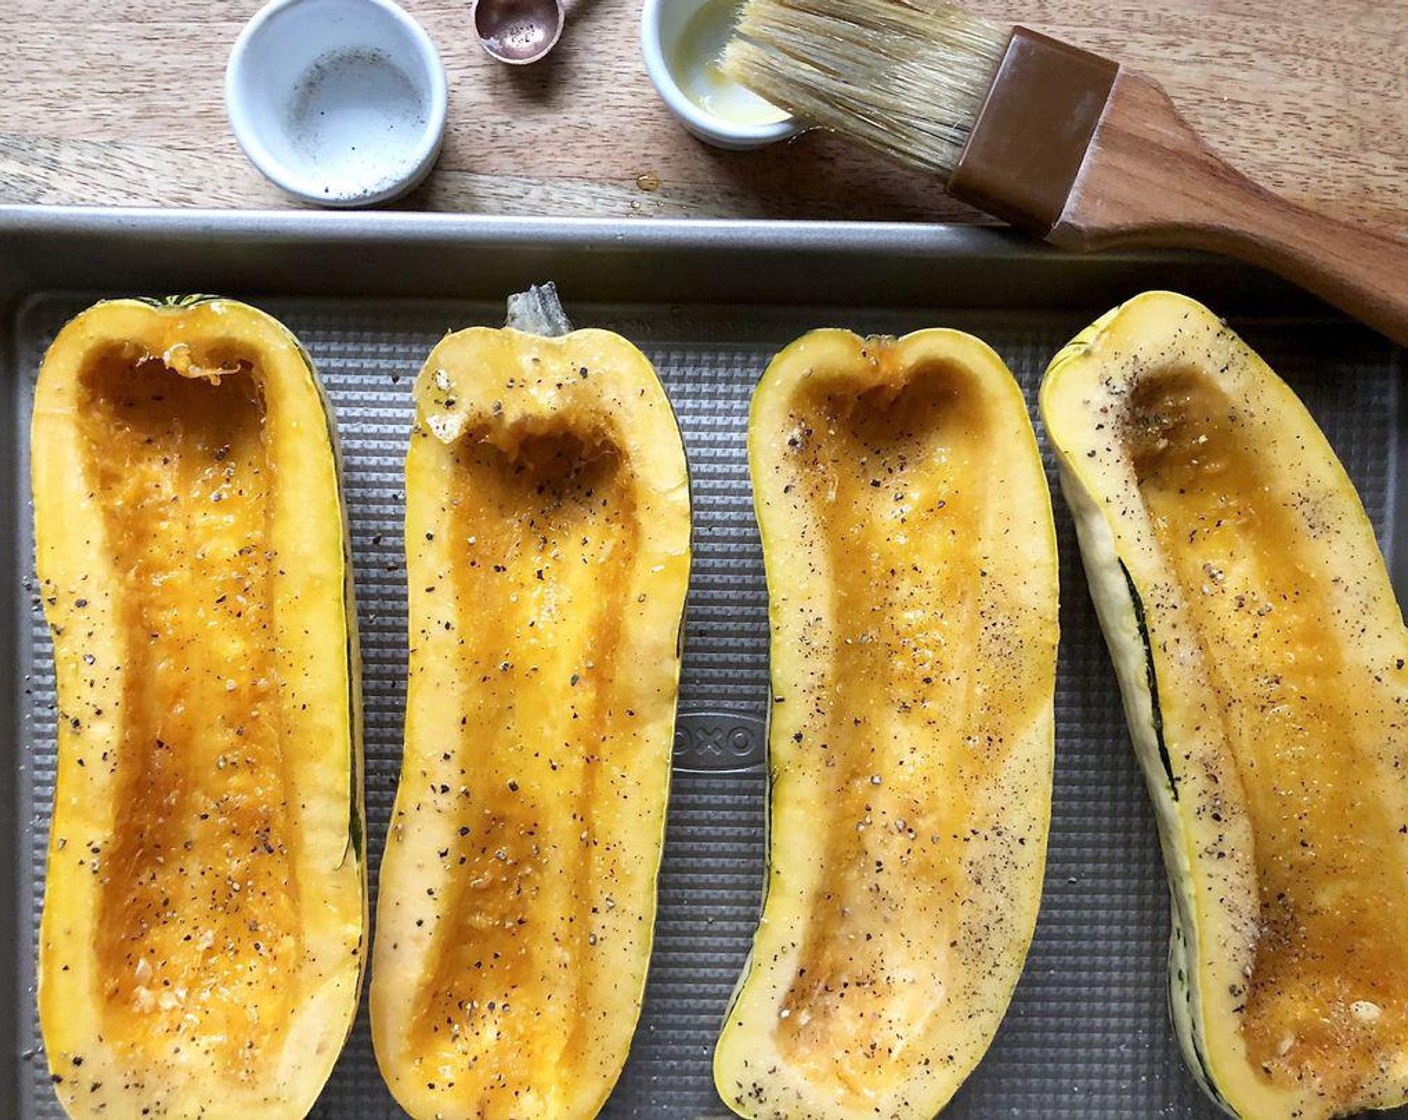 step 2 Brush cut sides of Delicata Squash (2) evenly with Olive Oil (1/2 Tbsp). Sprinkle with the Salt (1/4 tsp) and Freshly Ground Black Pepper (1/4 tsp). Place cut sides up on a large baking sheet. Roast for 30 minutes.